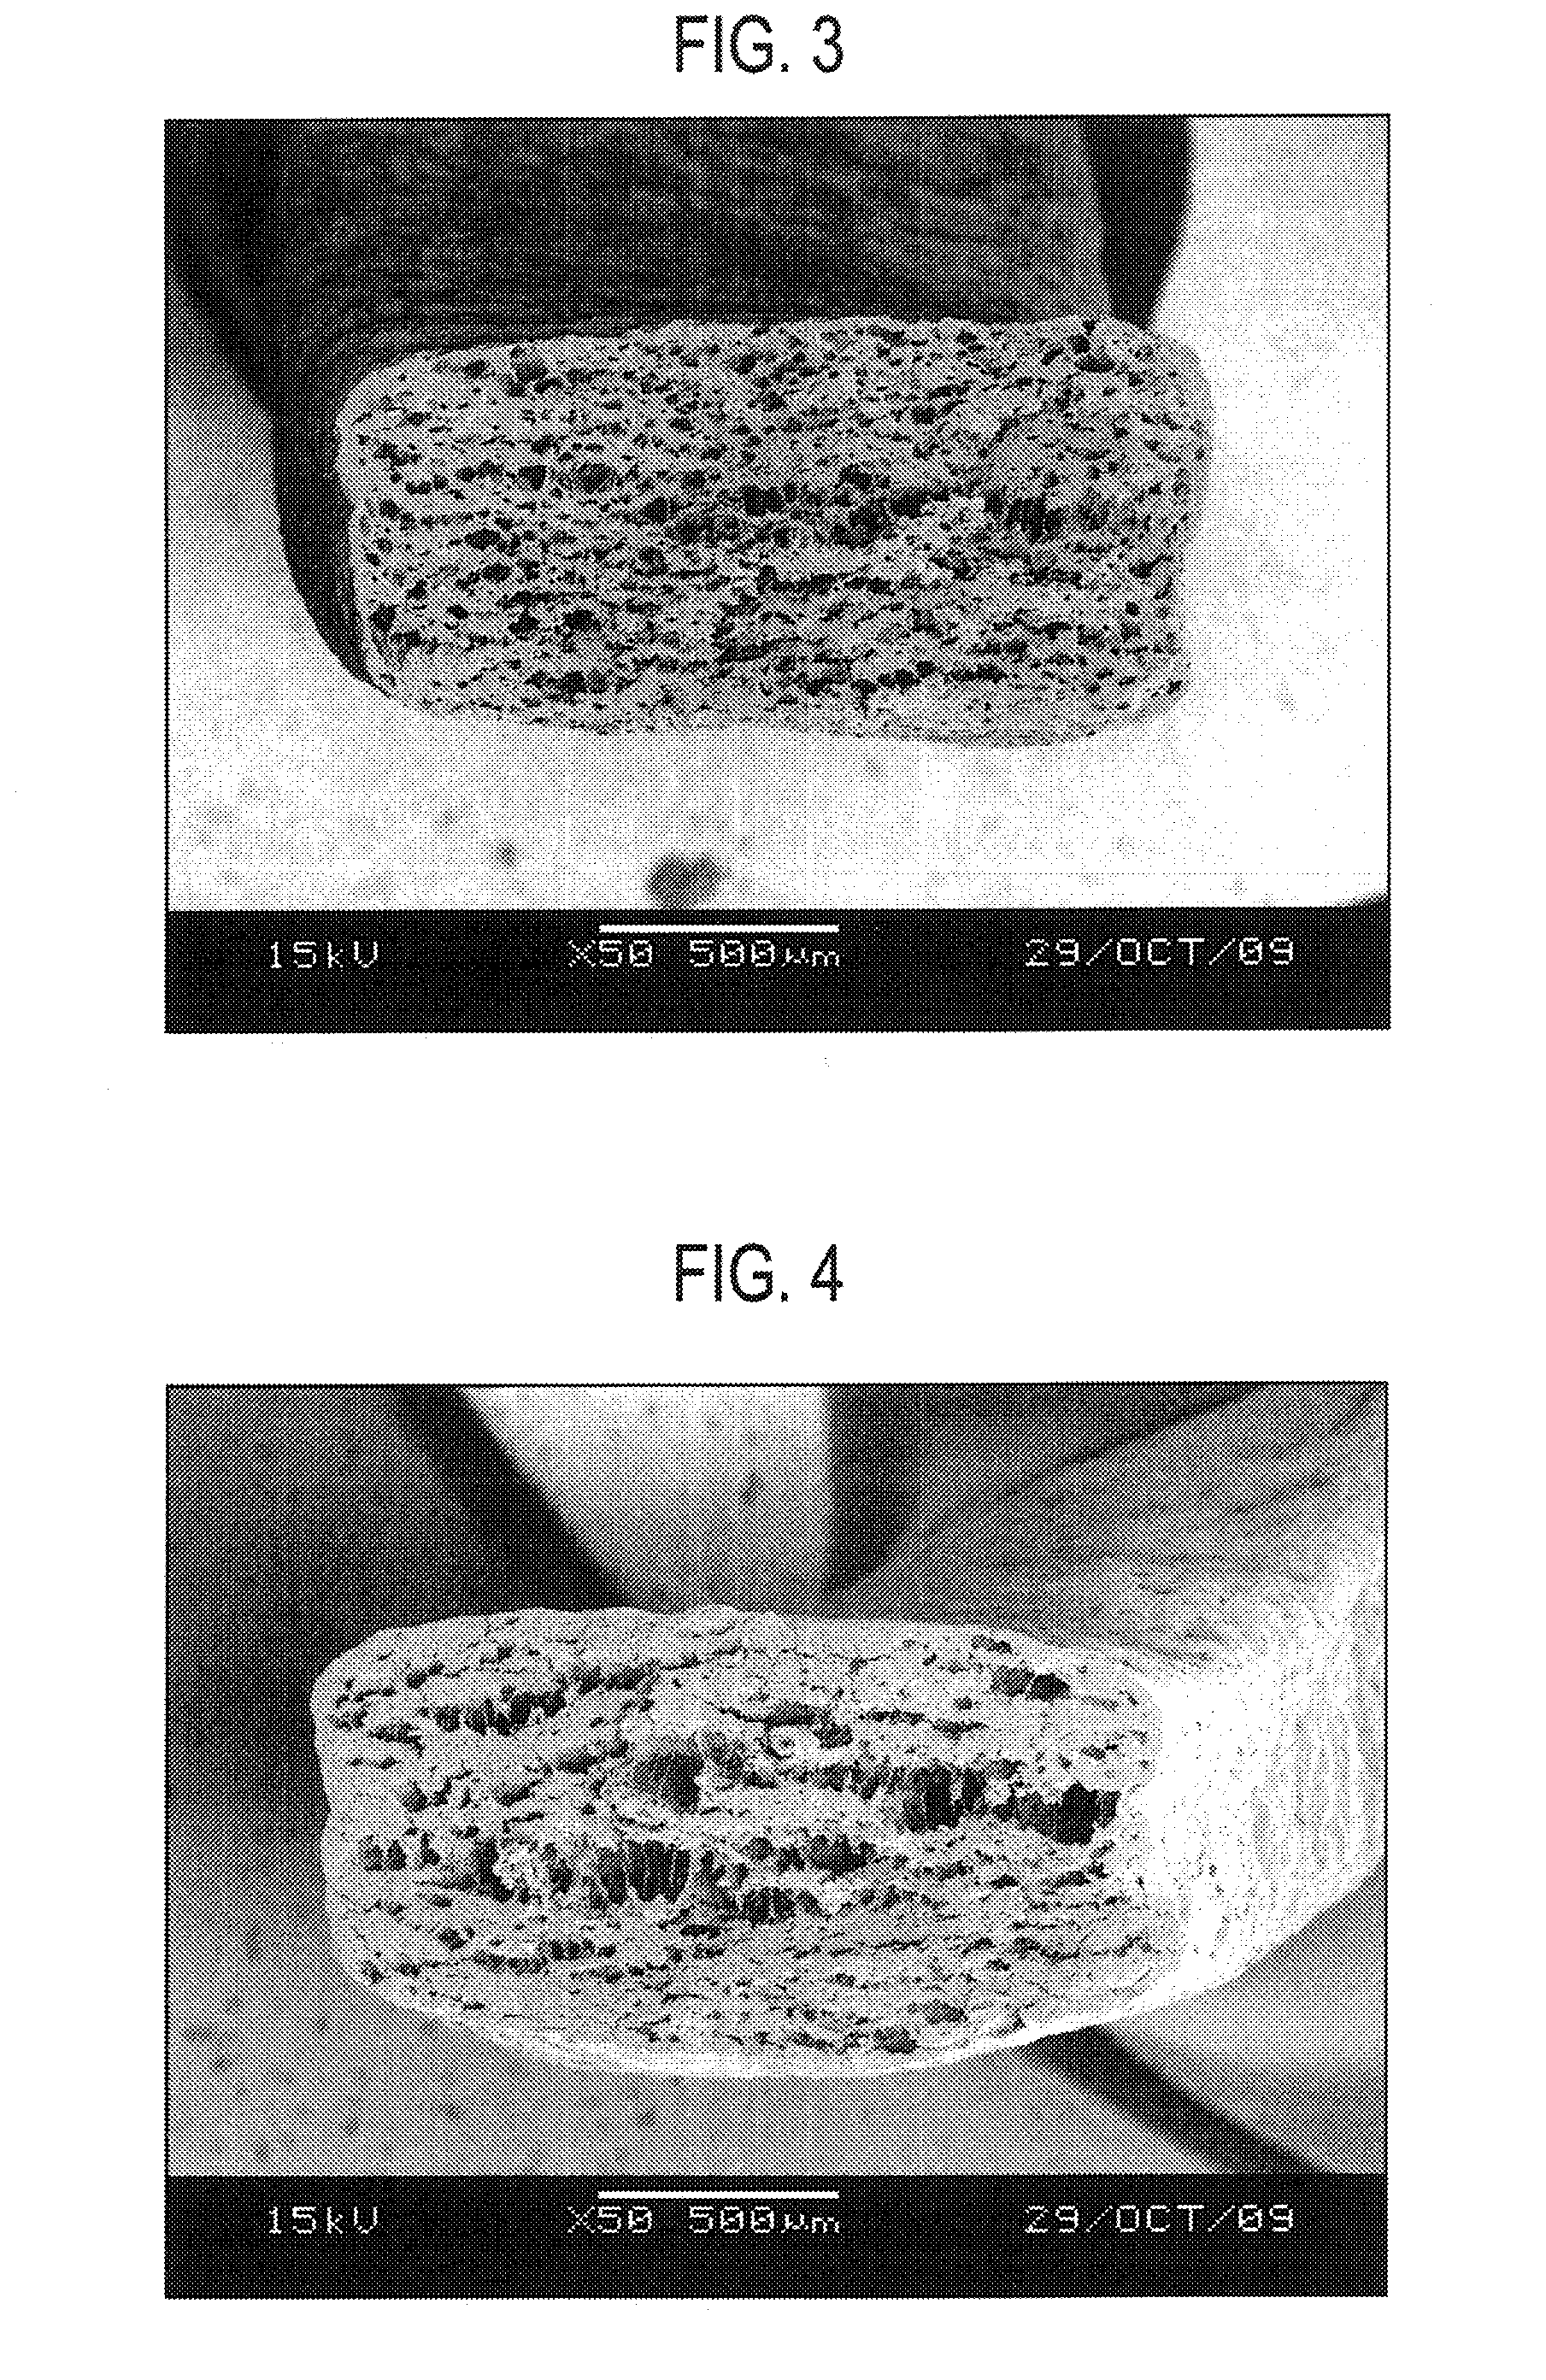 Method for producing instant noodles dried by hot air stream at high temperature